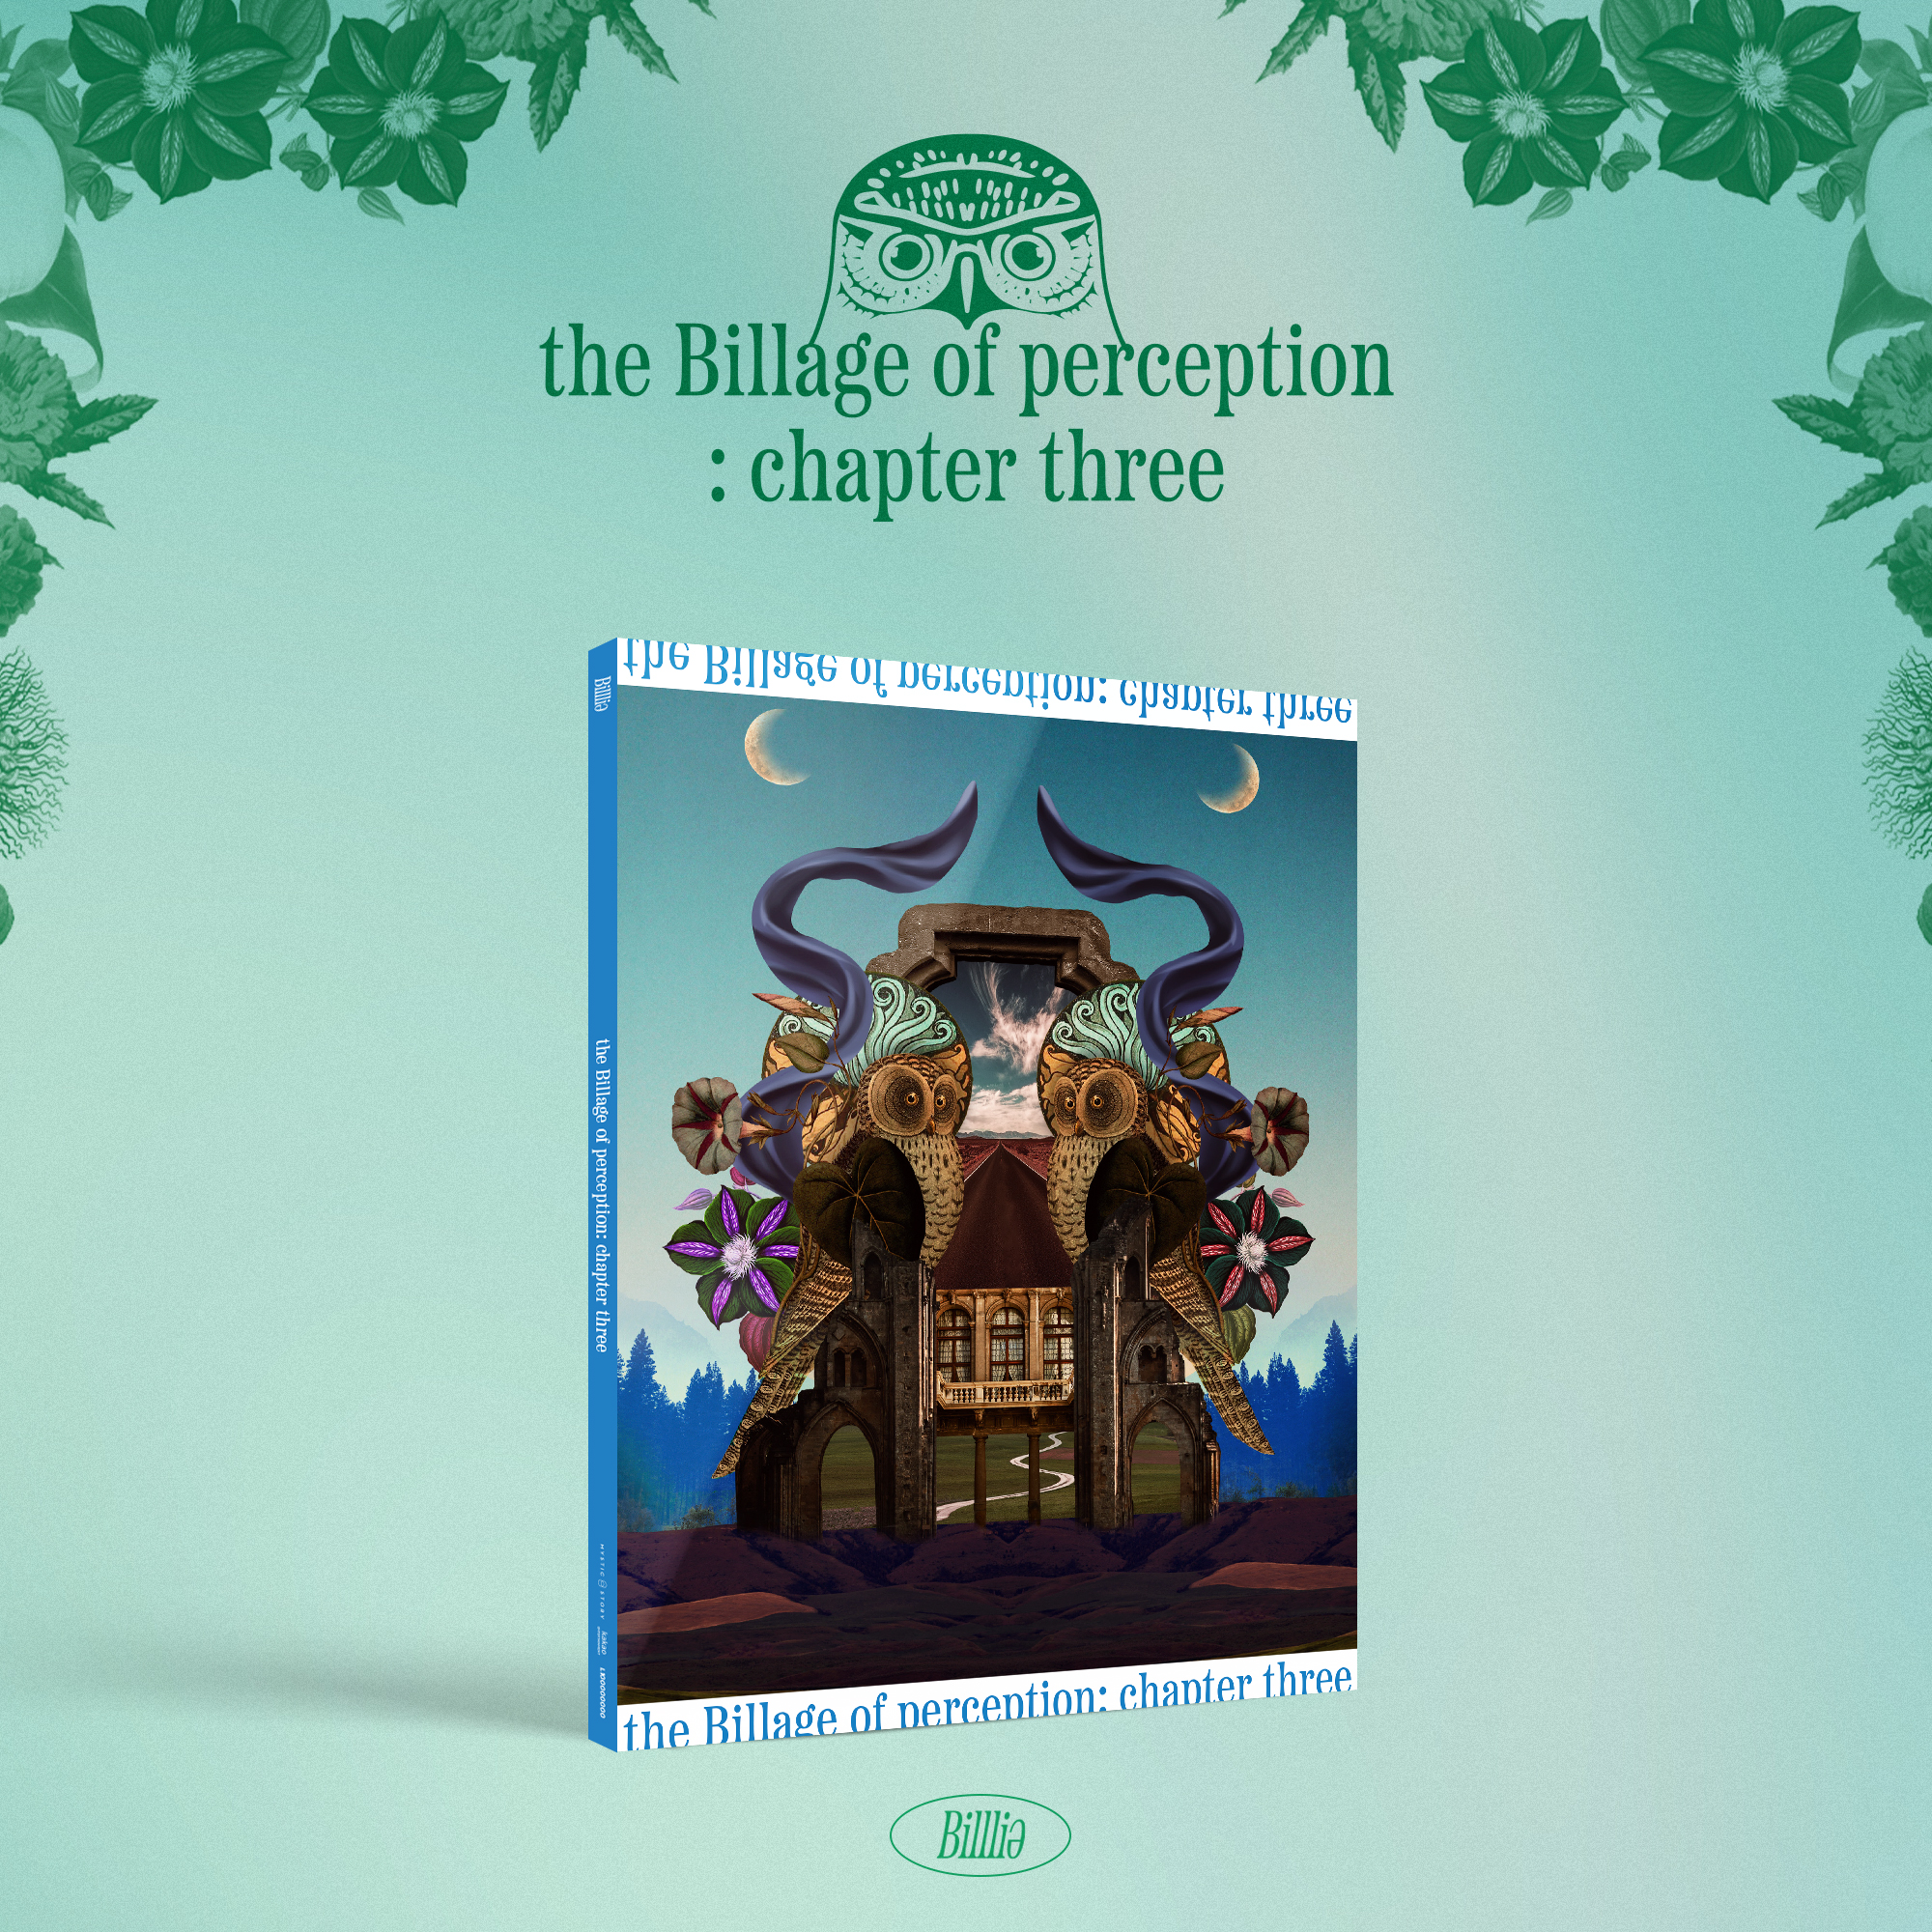 Billlie - 4th Mini Album [the Billage of perception: chapter three] (01:01 AM collection) 